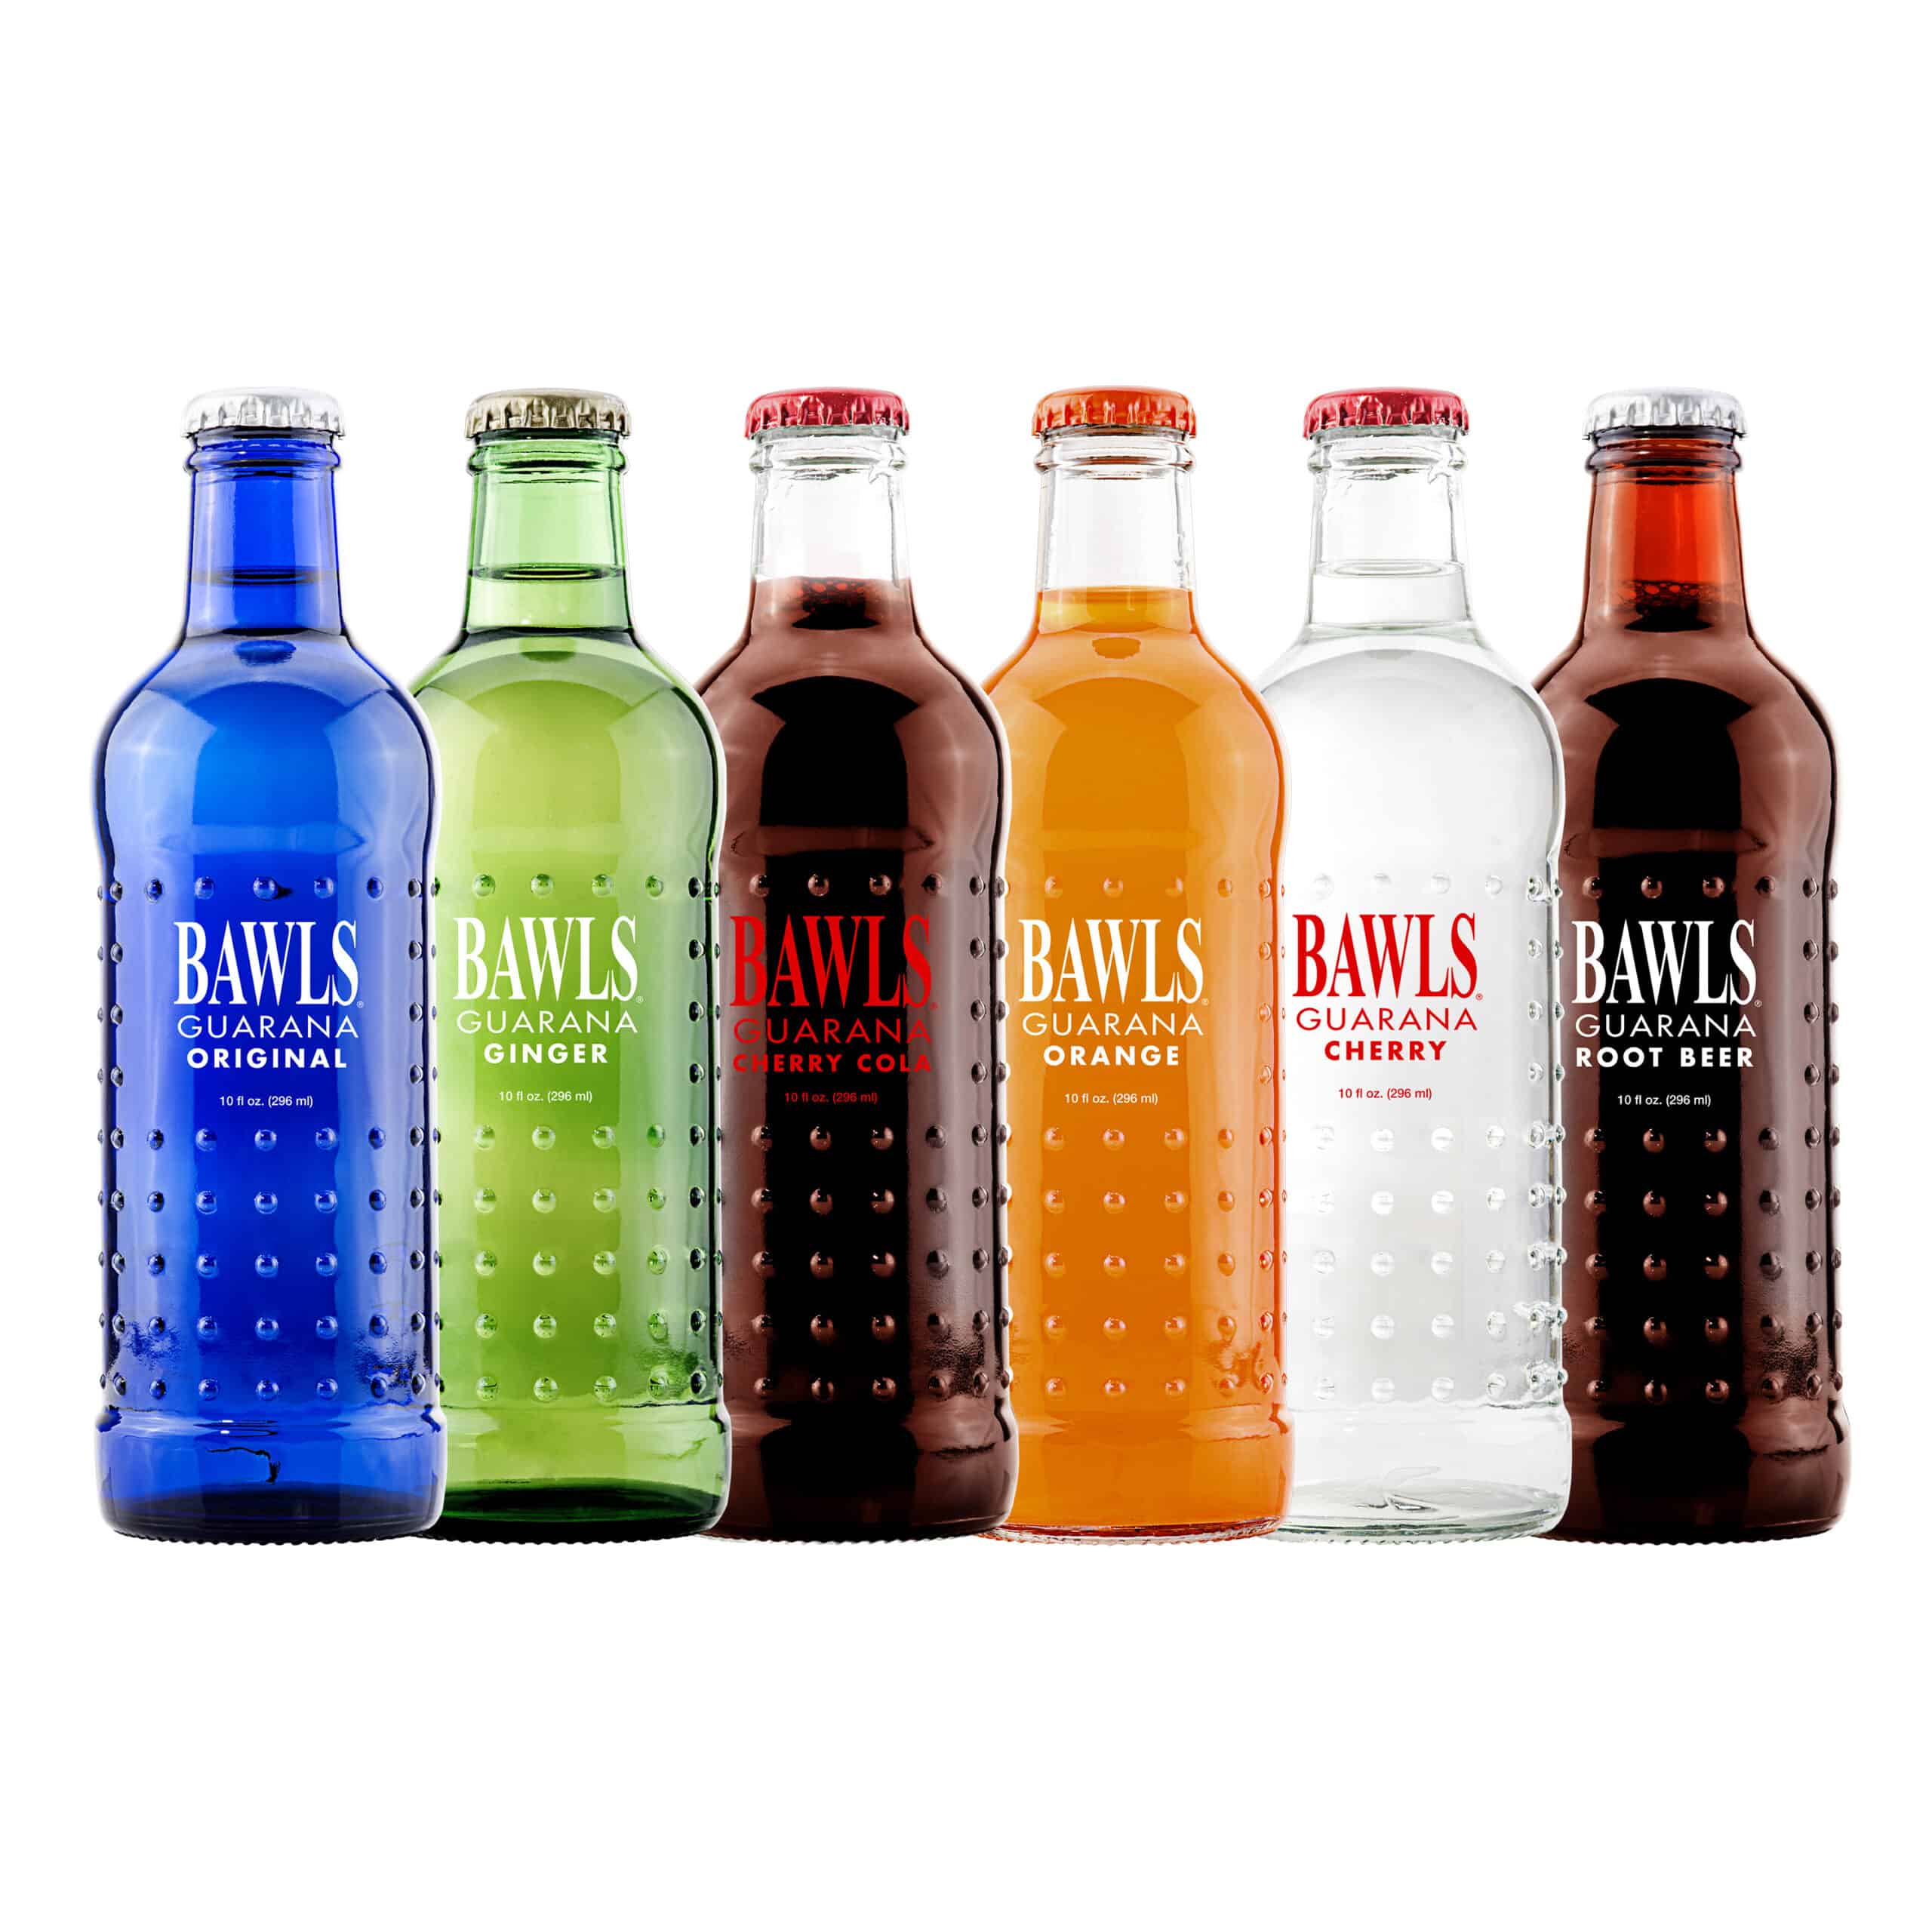 Bawls Energy Drink Review - 12 Things You Need to